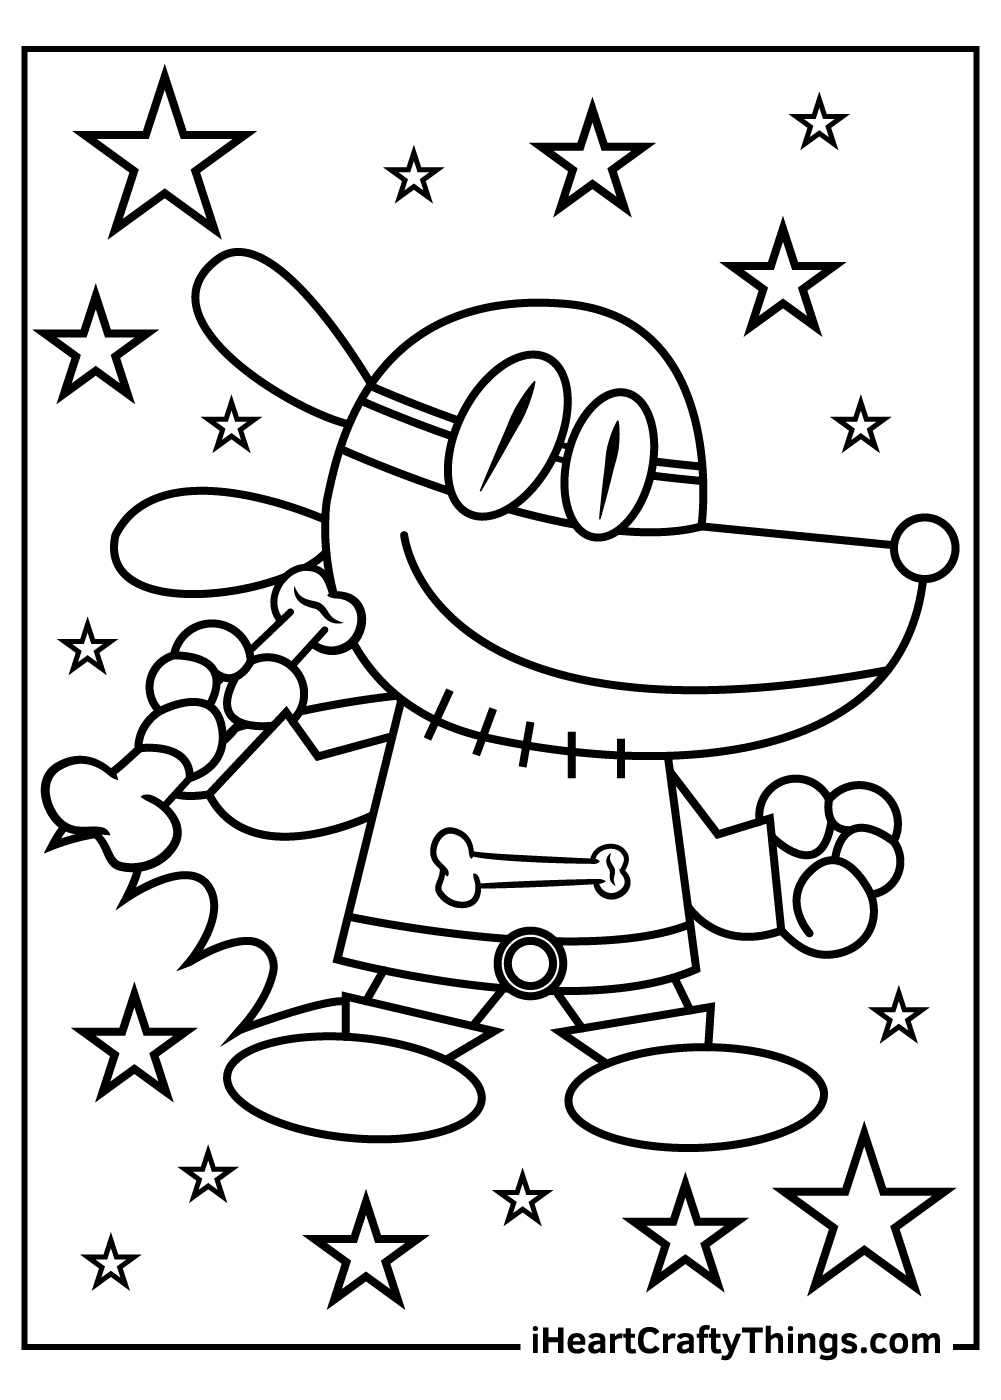 Dog man coloring pages free printables